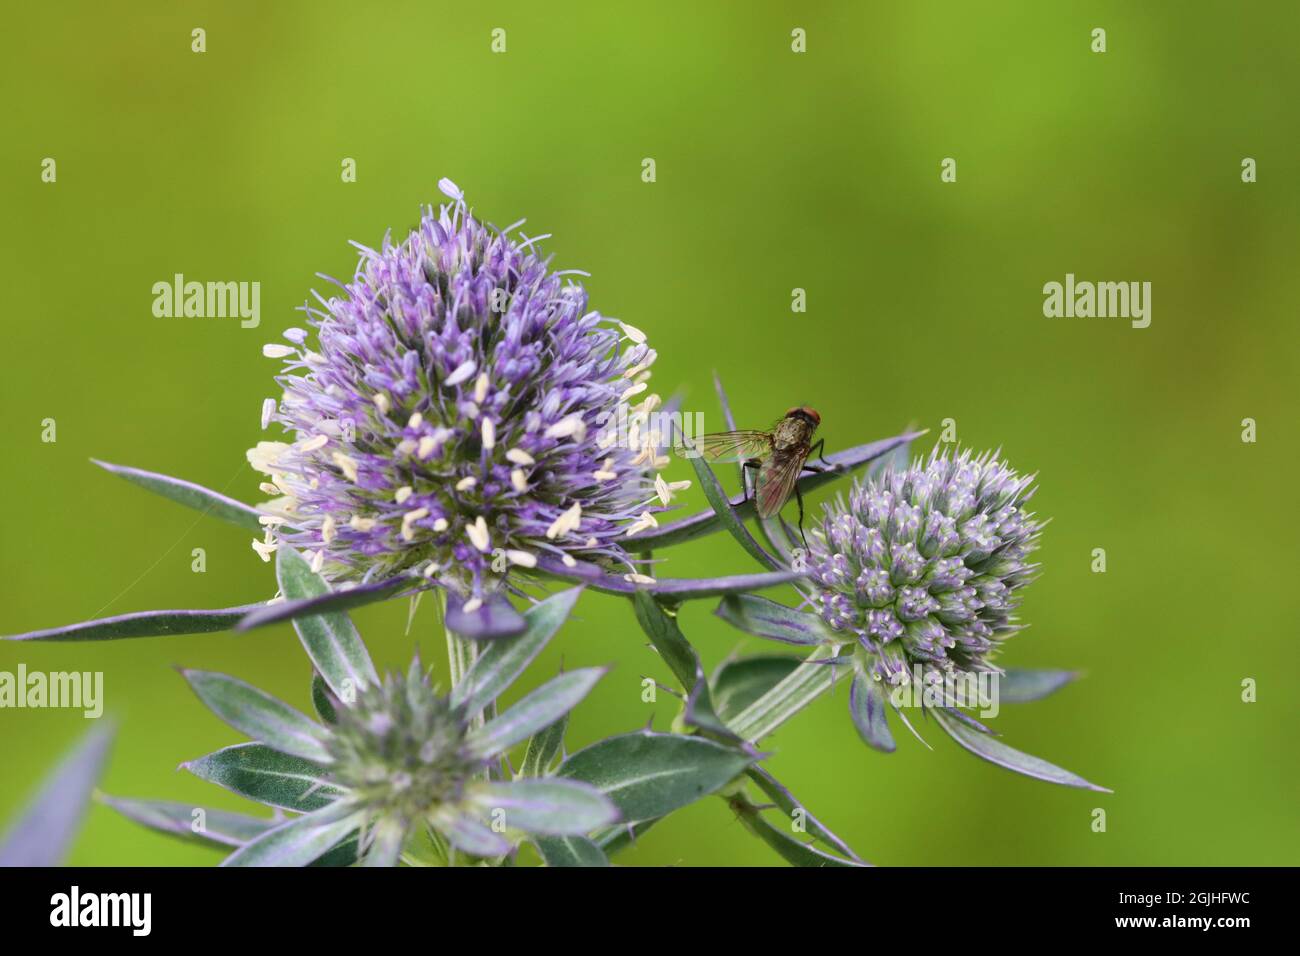 close-up of a flower fly sitting on a beautiful bluish thistle blossom Stock Photo